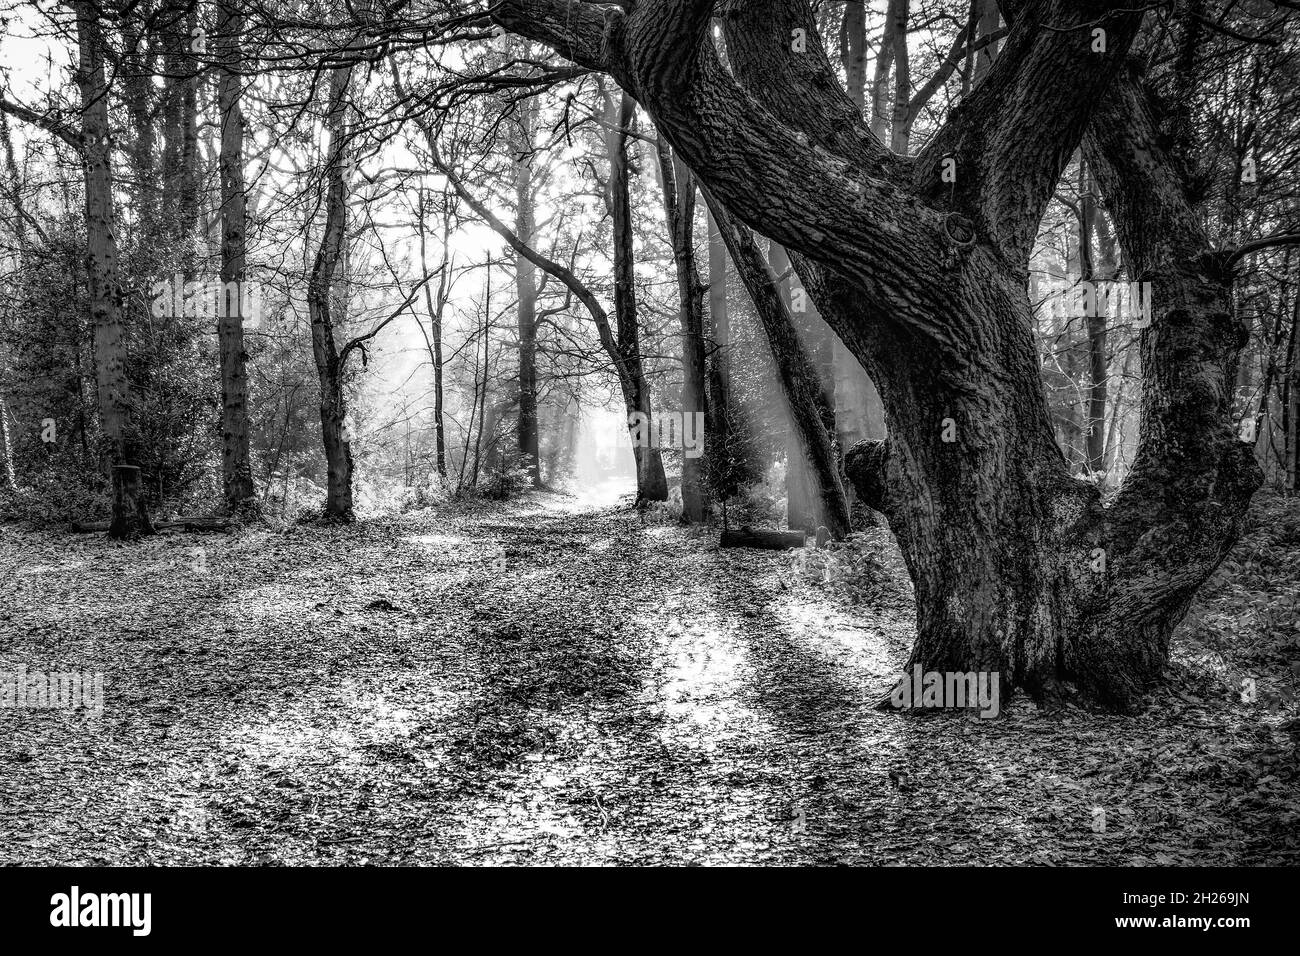 Autumn sunlight streaming through a wooded forest in Black and White Stock Photo